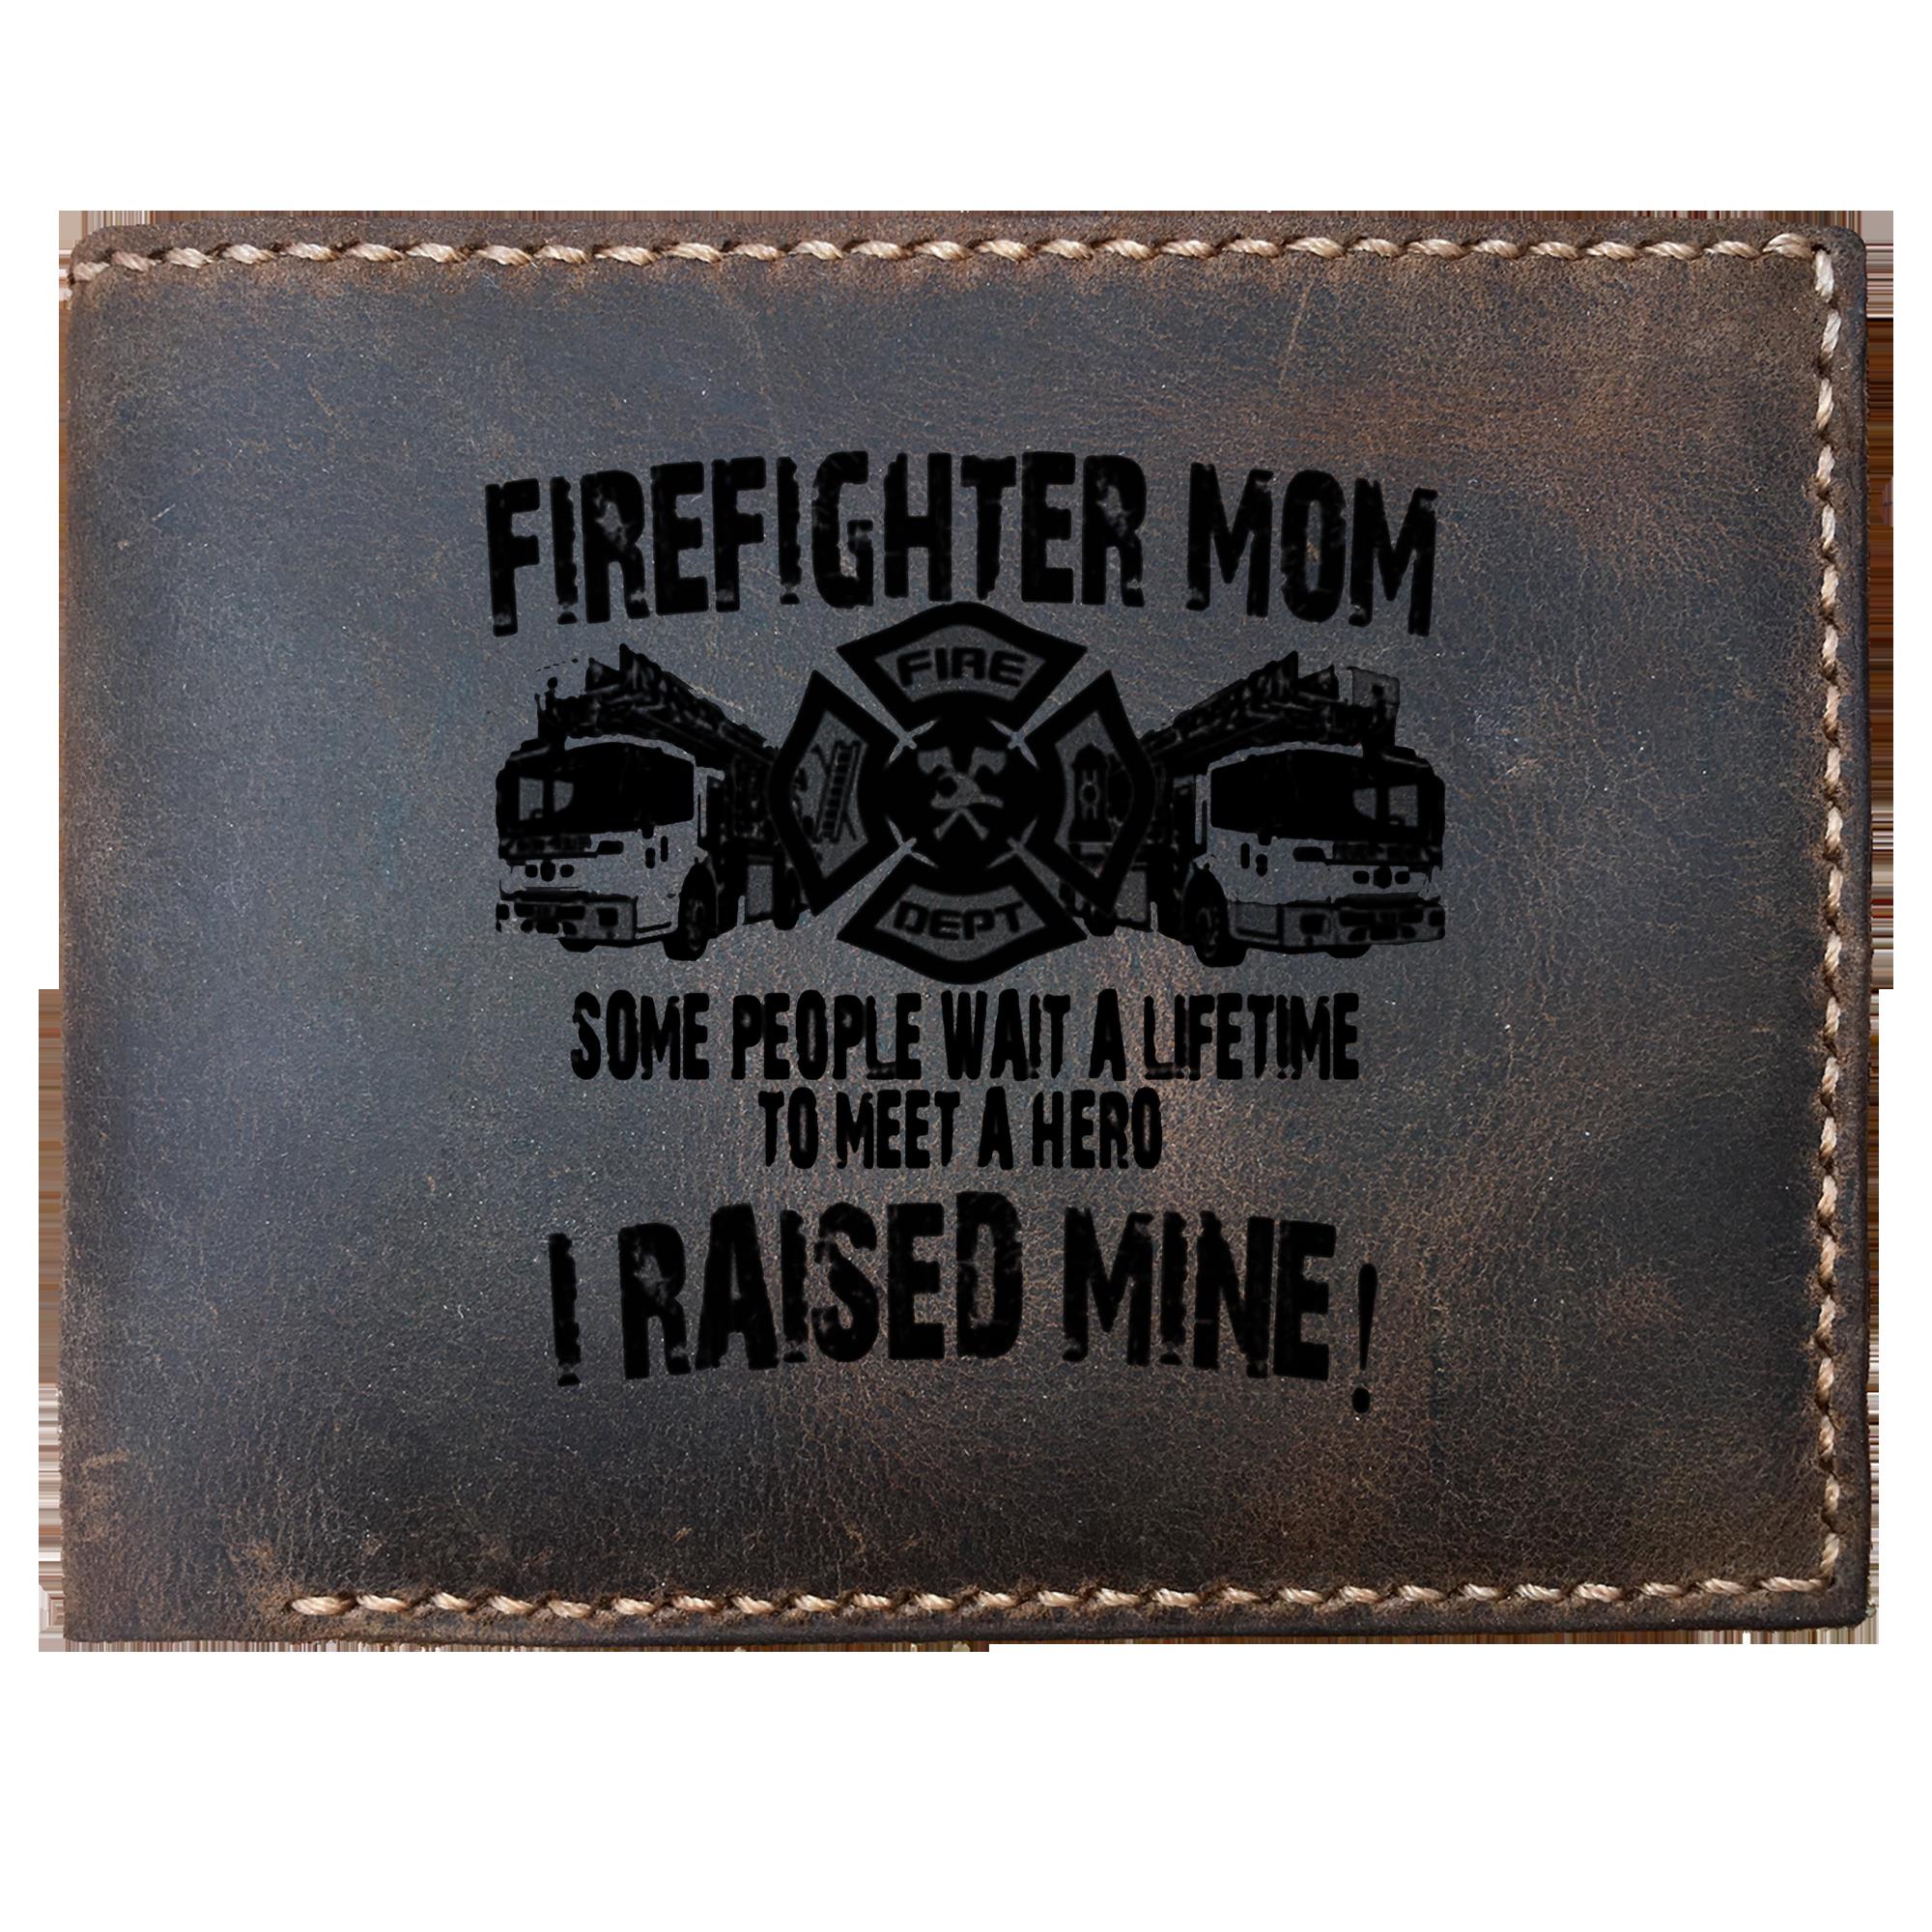 Skitongifts Funny Custom Laser Engraved Bifold Leather Wallet For Men, Firefighter Mom Some People Wait A Lifetime